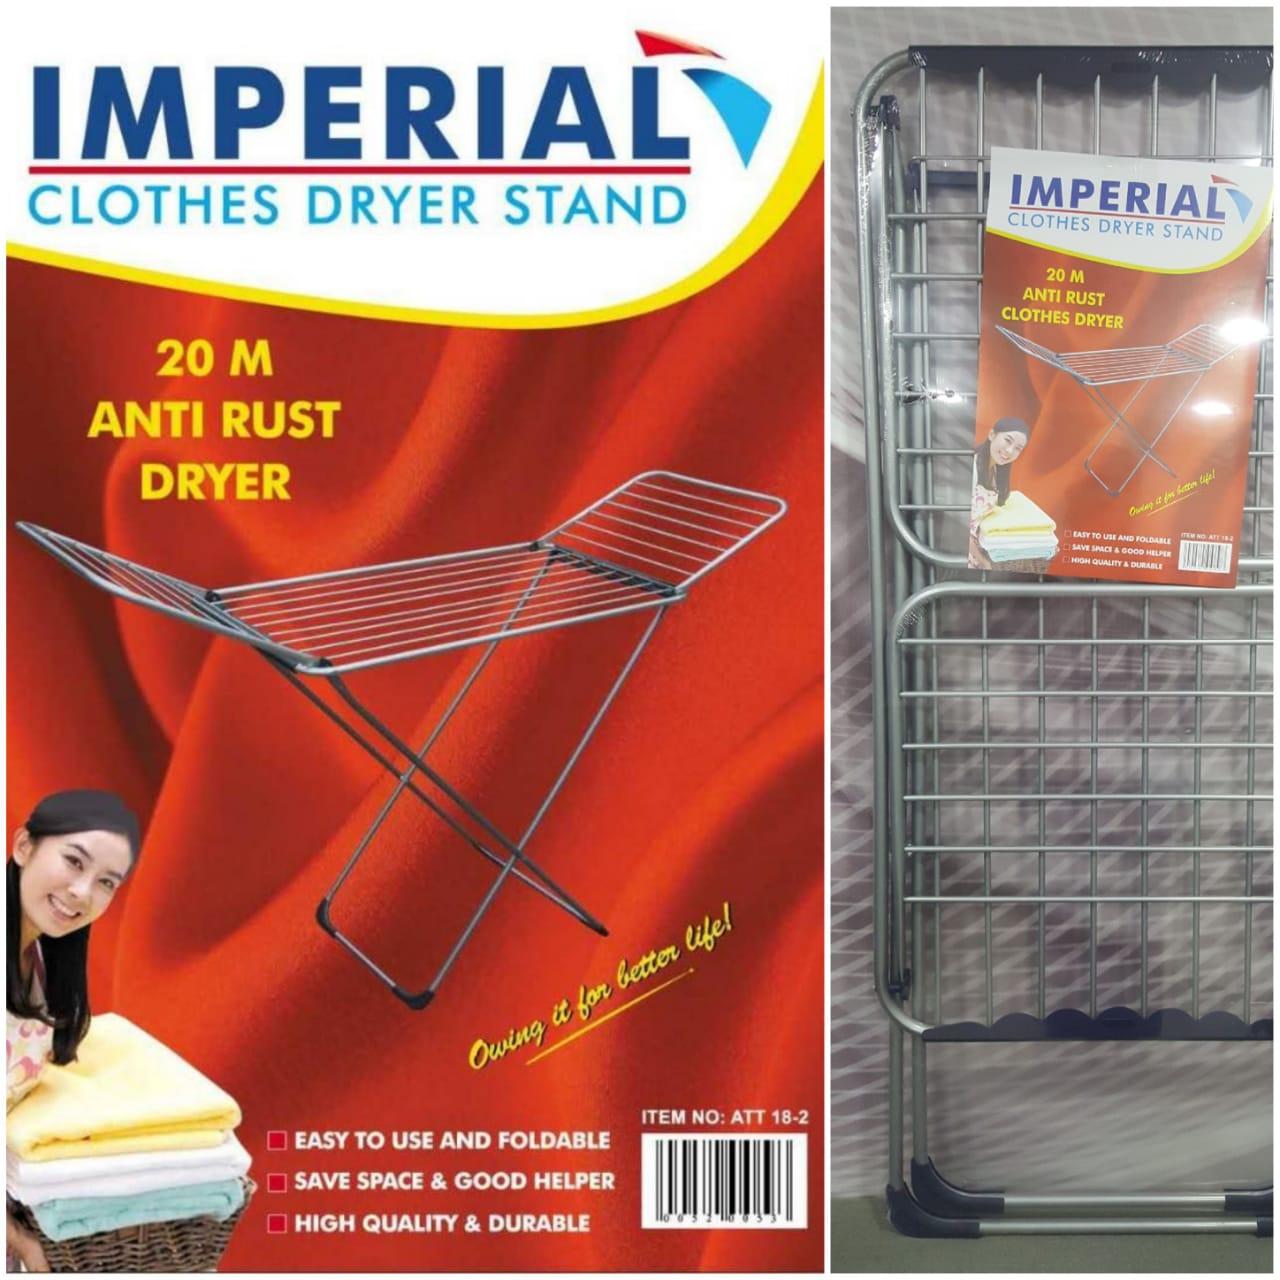 20 M Anti Rust Cloth Dyer Rack Price in Pakistan - View Latest Collection  of Clothes Line & Drying Racks